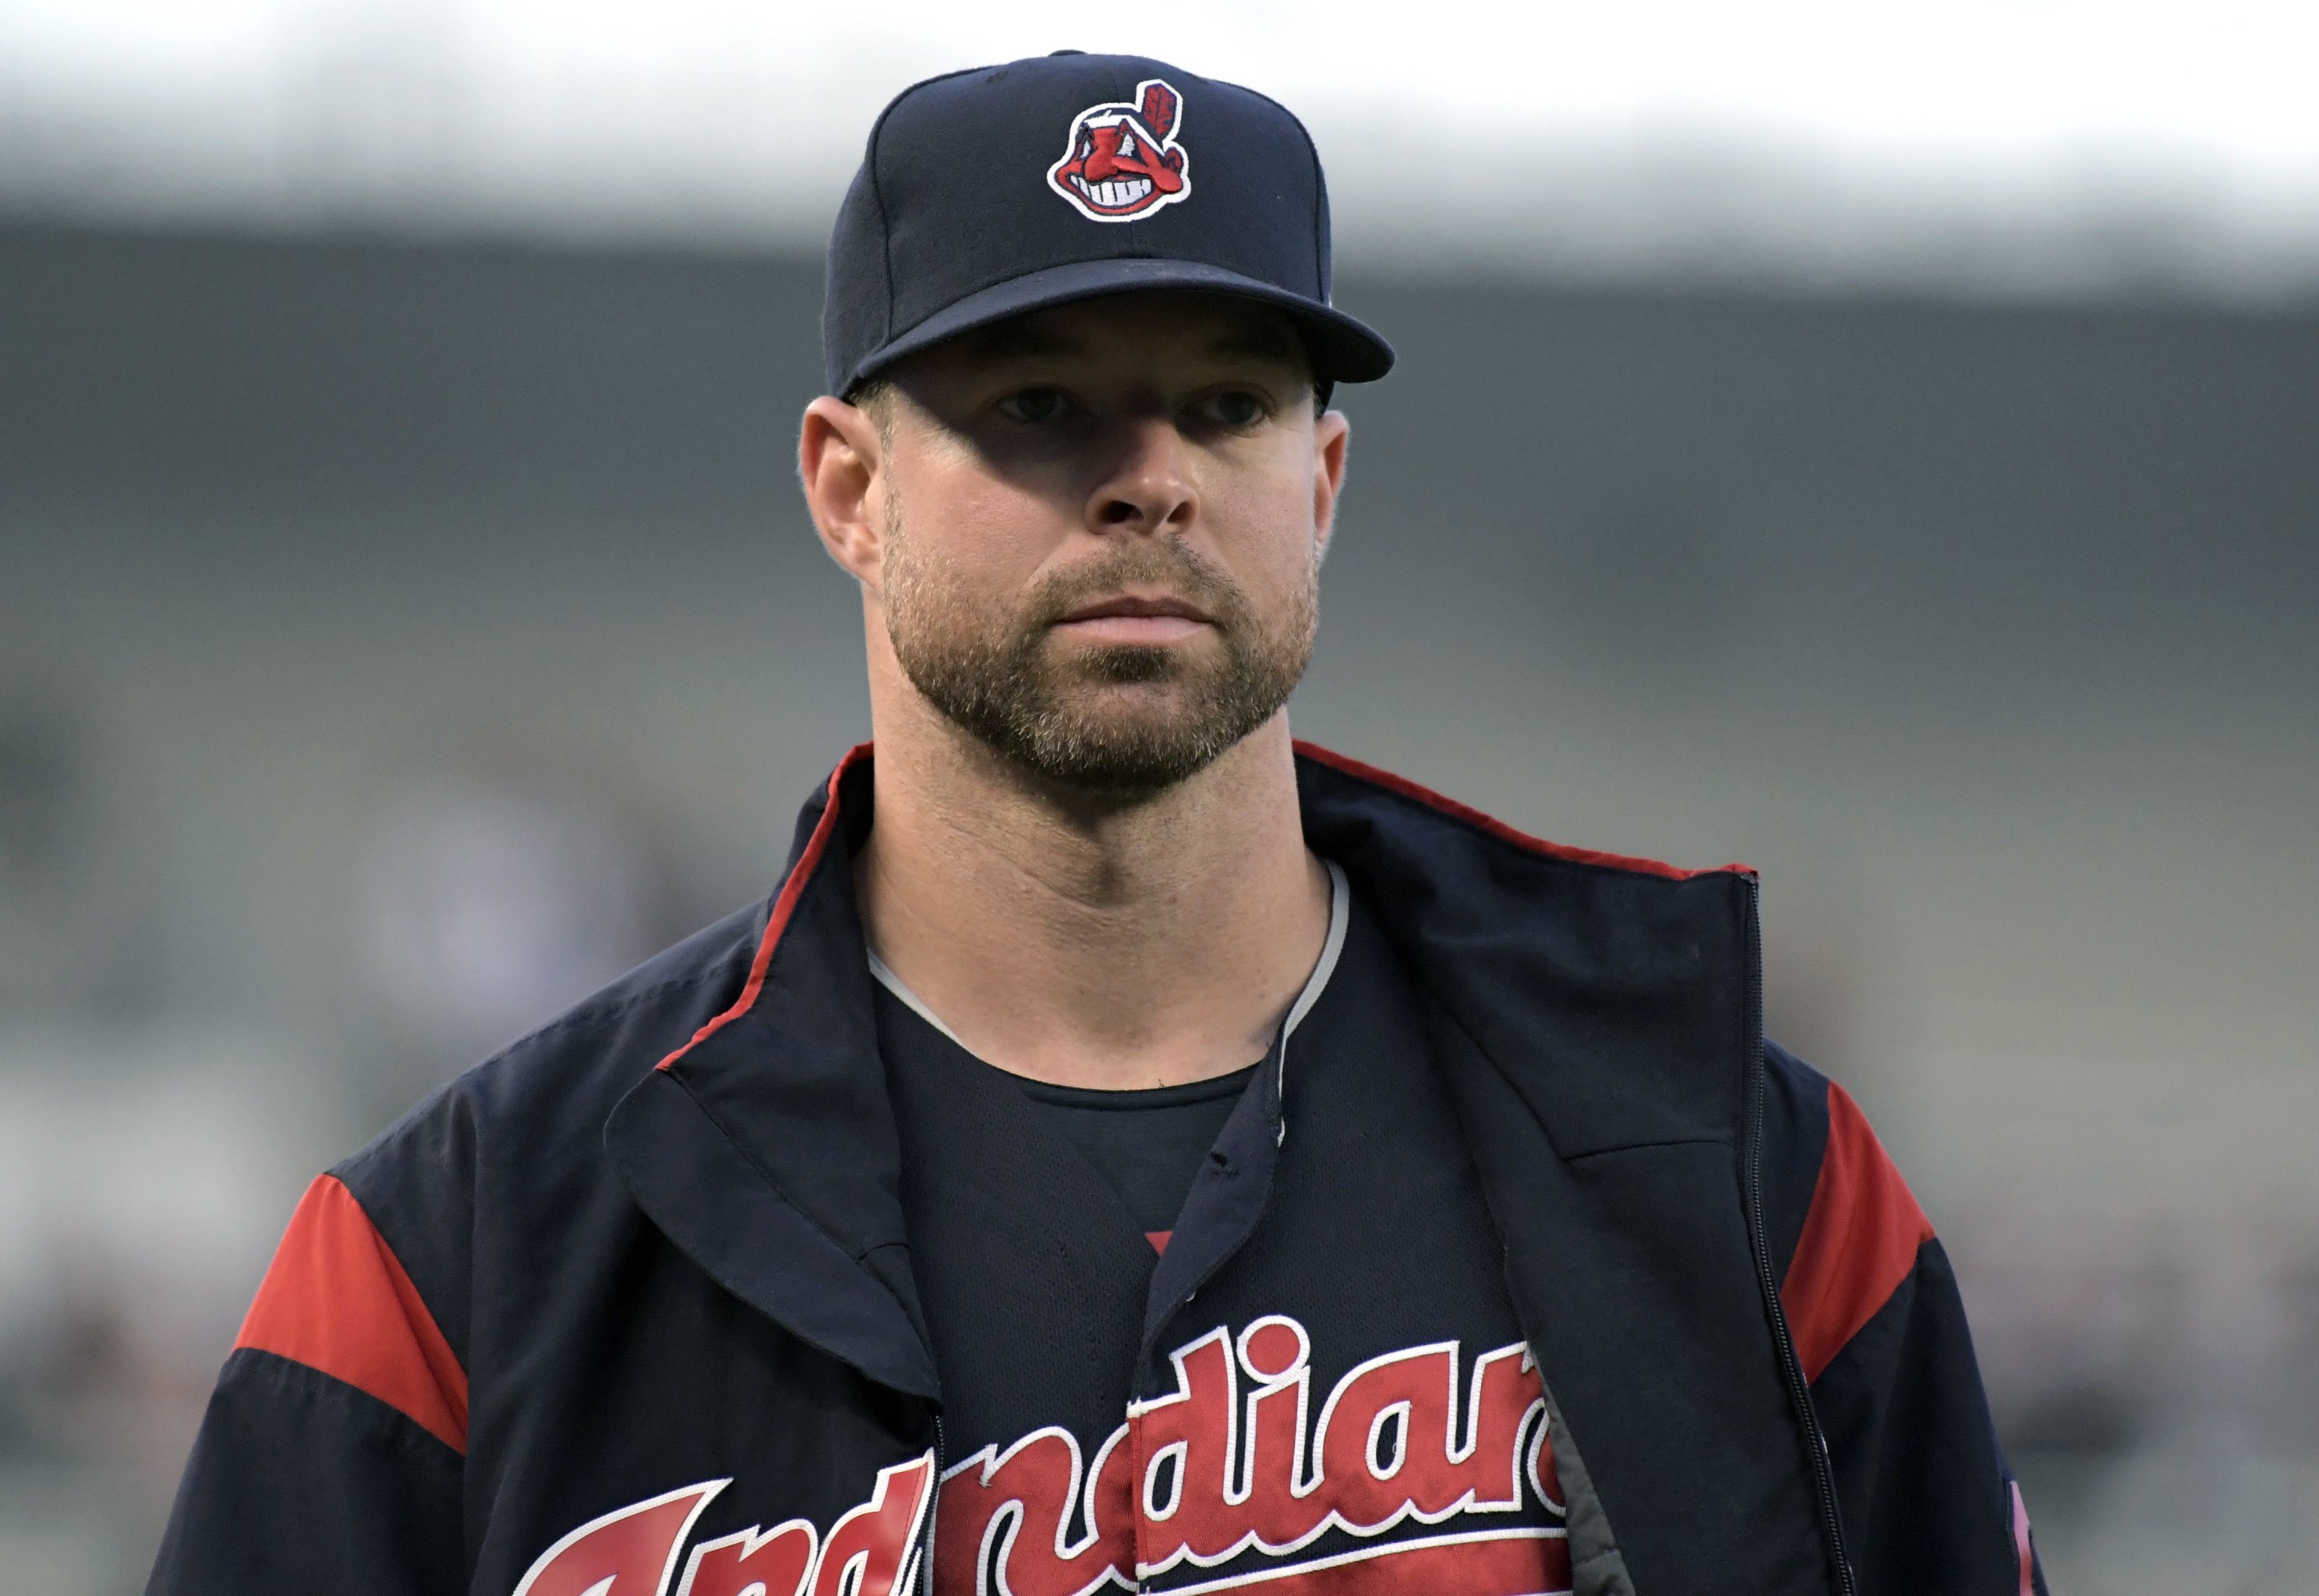 SAN DIEGO, CA - JULY 12: Corey Kluber #28 of the Cleveland Indians